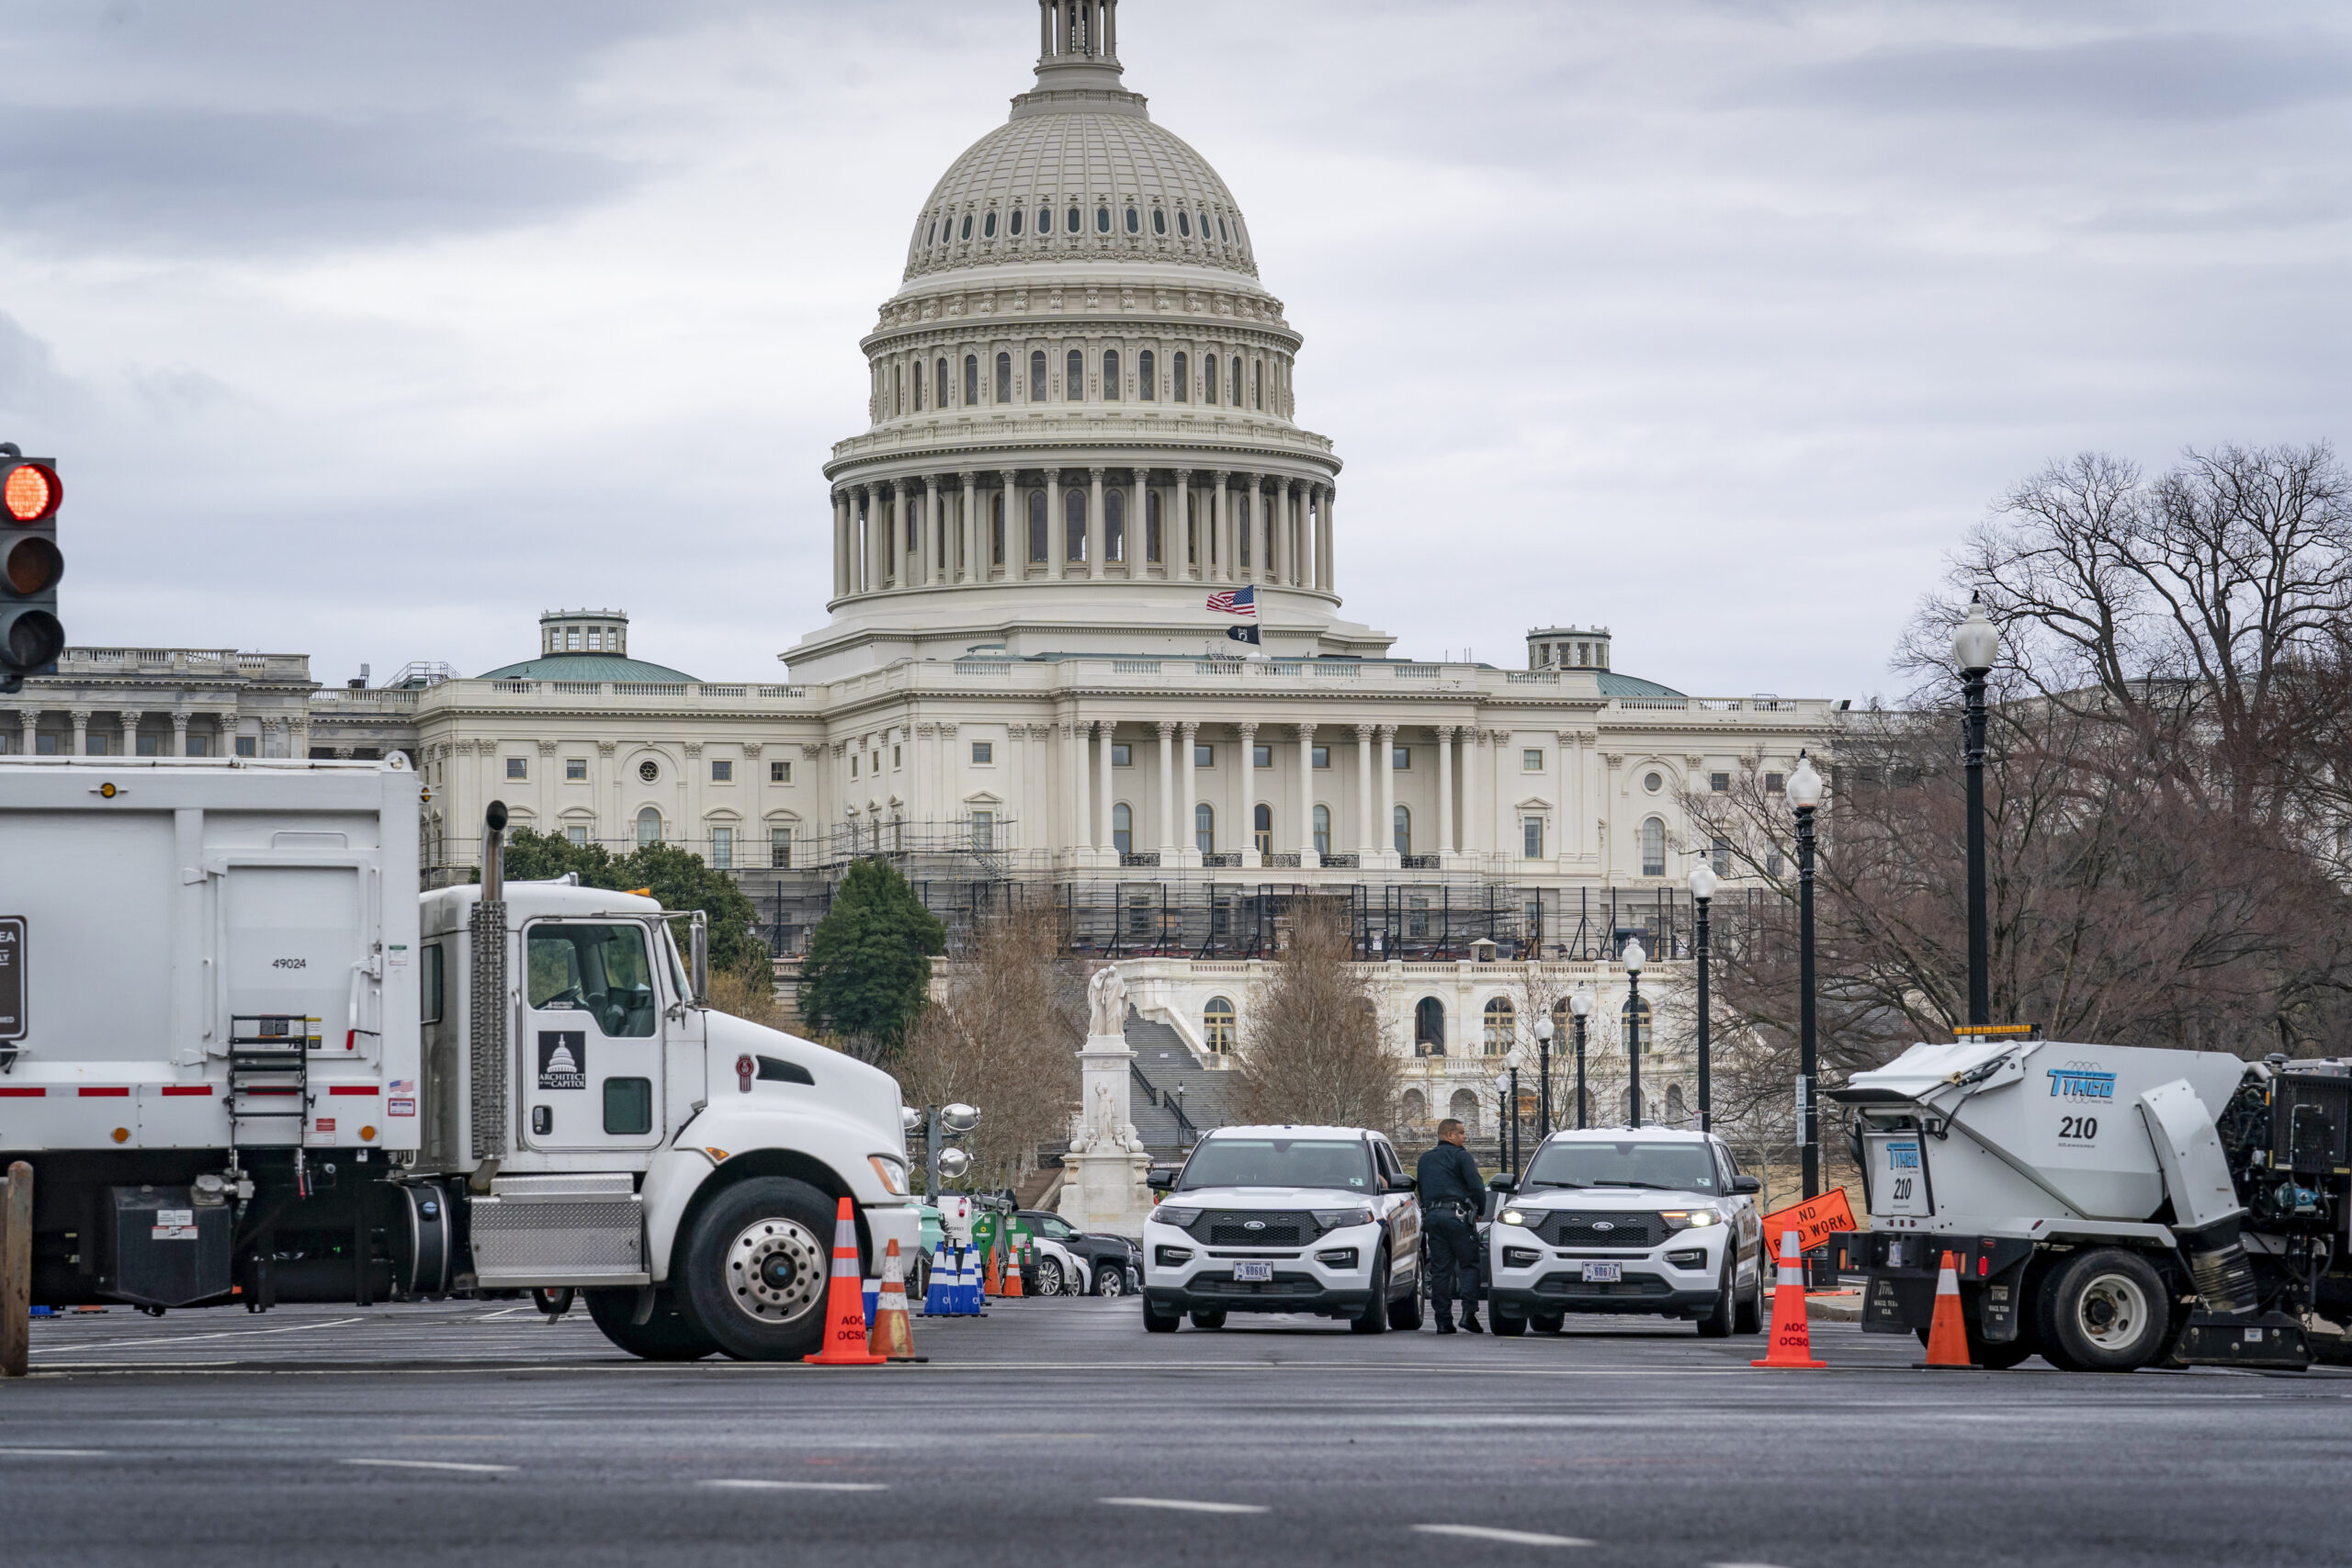 Heavy vehicles, including garbage trucks and snow plows, are set near the entrance to Capitol Hill at Pennsylvania Avenue and 3rd Street NW in Washington, Tuesday, Feb. 22, 2022, amid reports that trucker protests will arrive on March 1, the day of President Joe Biden's State of the Union address. (AP Photo/J. Scott Applewhite)